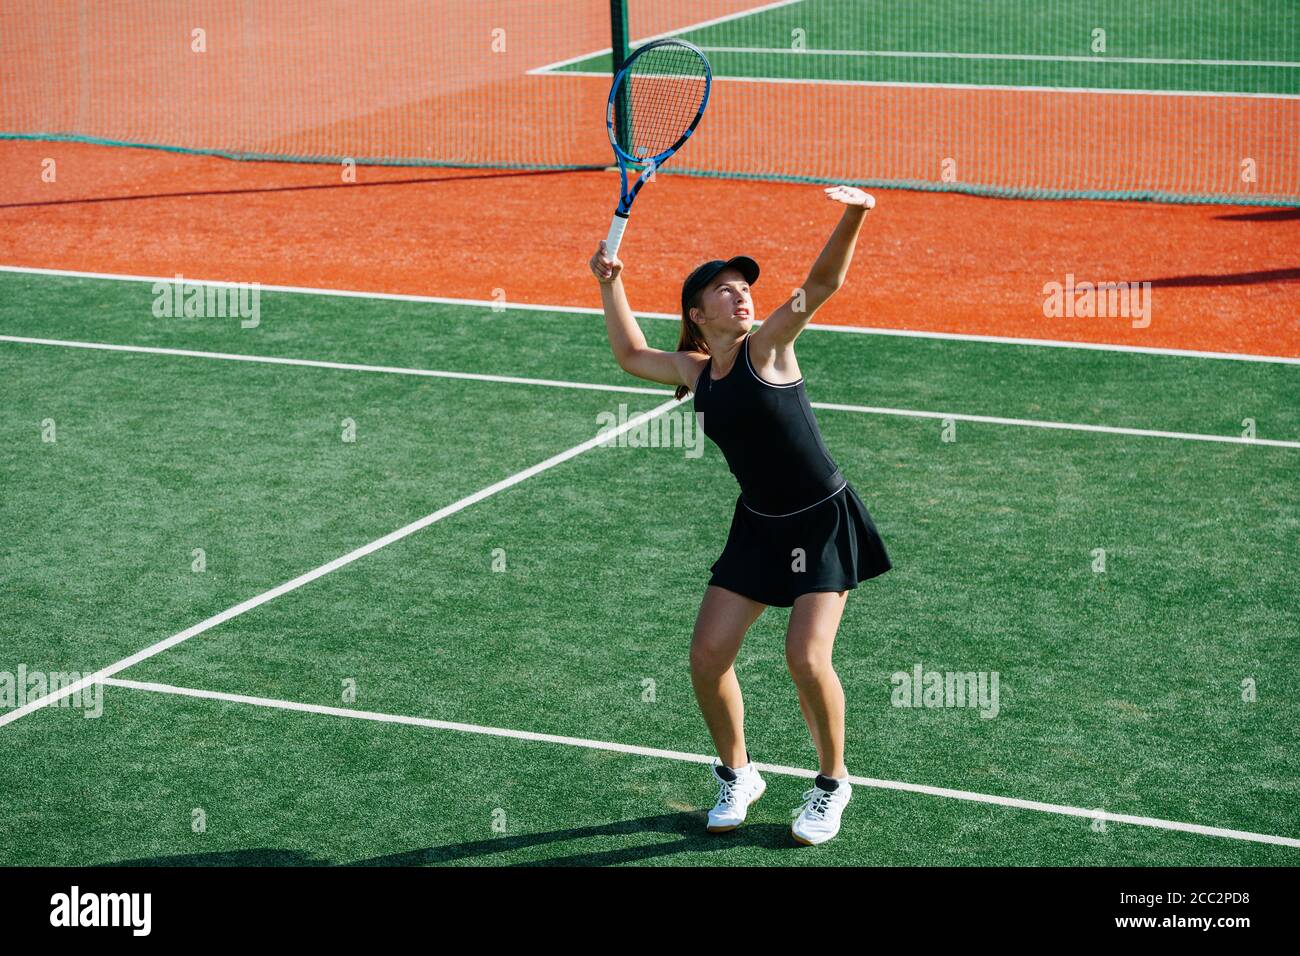 Looking up girl playing tennis on a new court, ready to return overhead ball Stock Photo